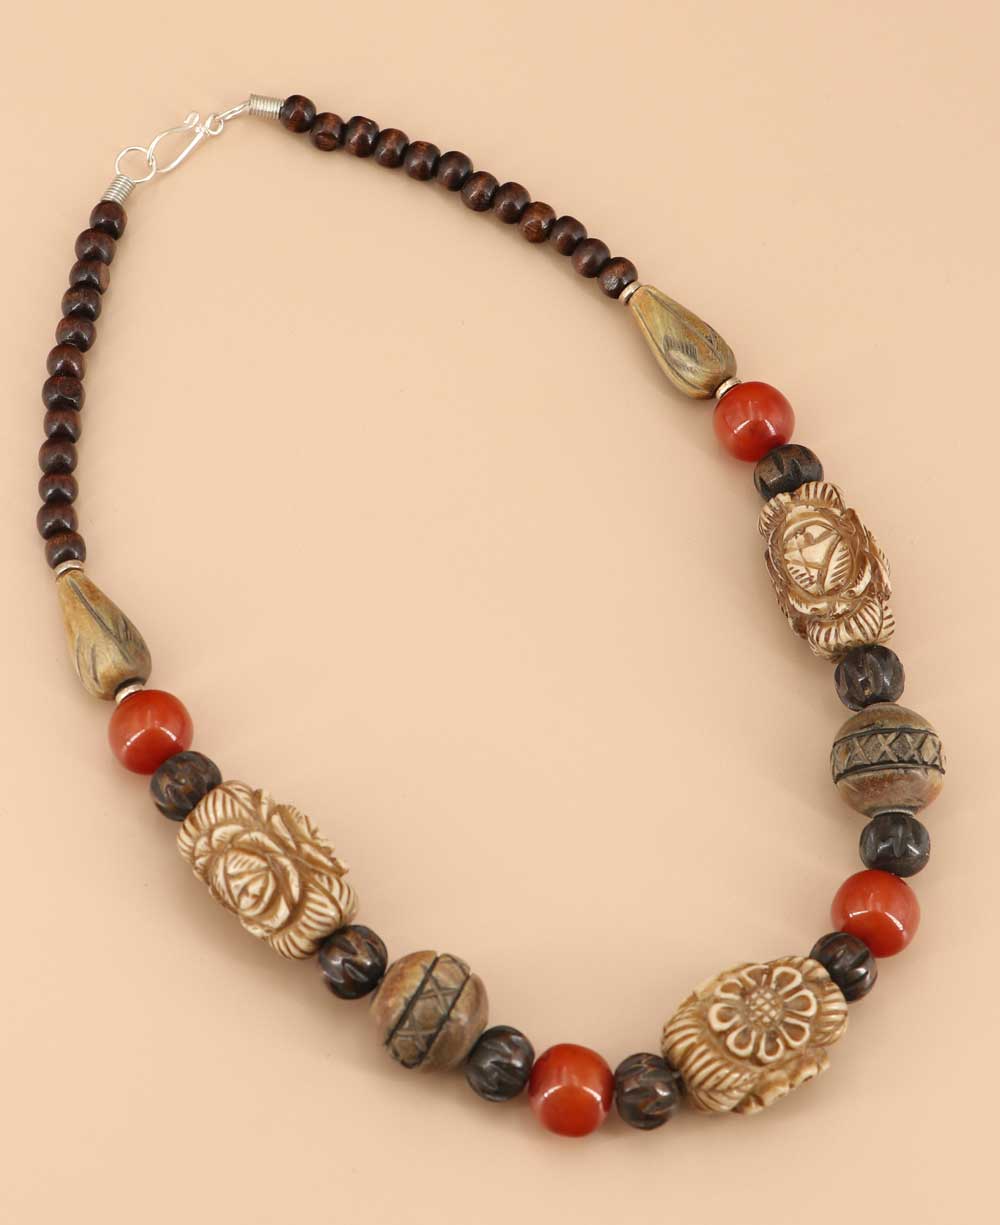 Handcrafted necklace with carved beads and red accents